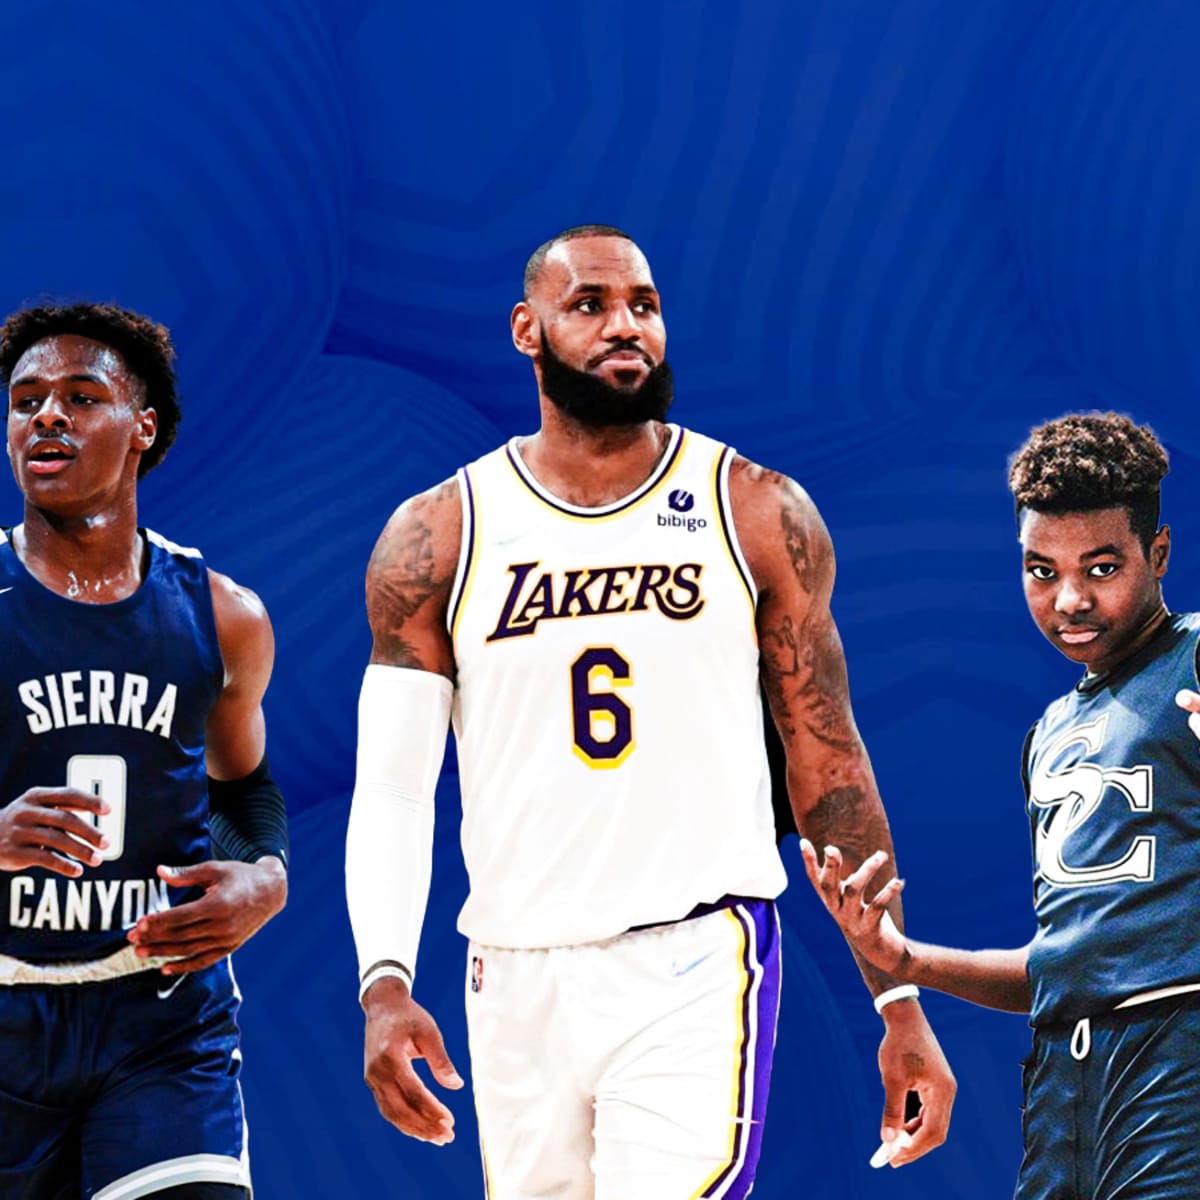 Bronny and Bryce James' 2023 height: how tall are LeBron James' sons?